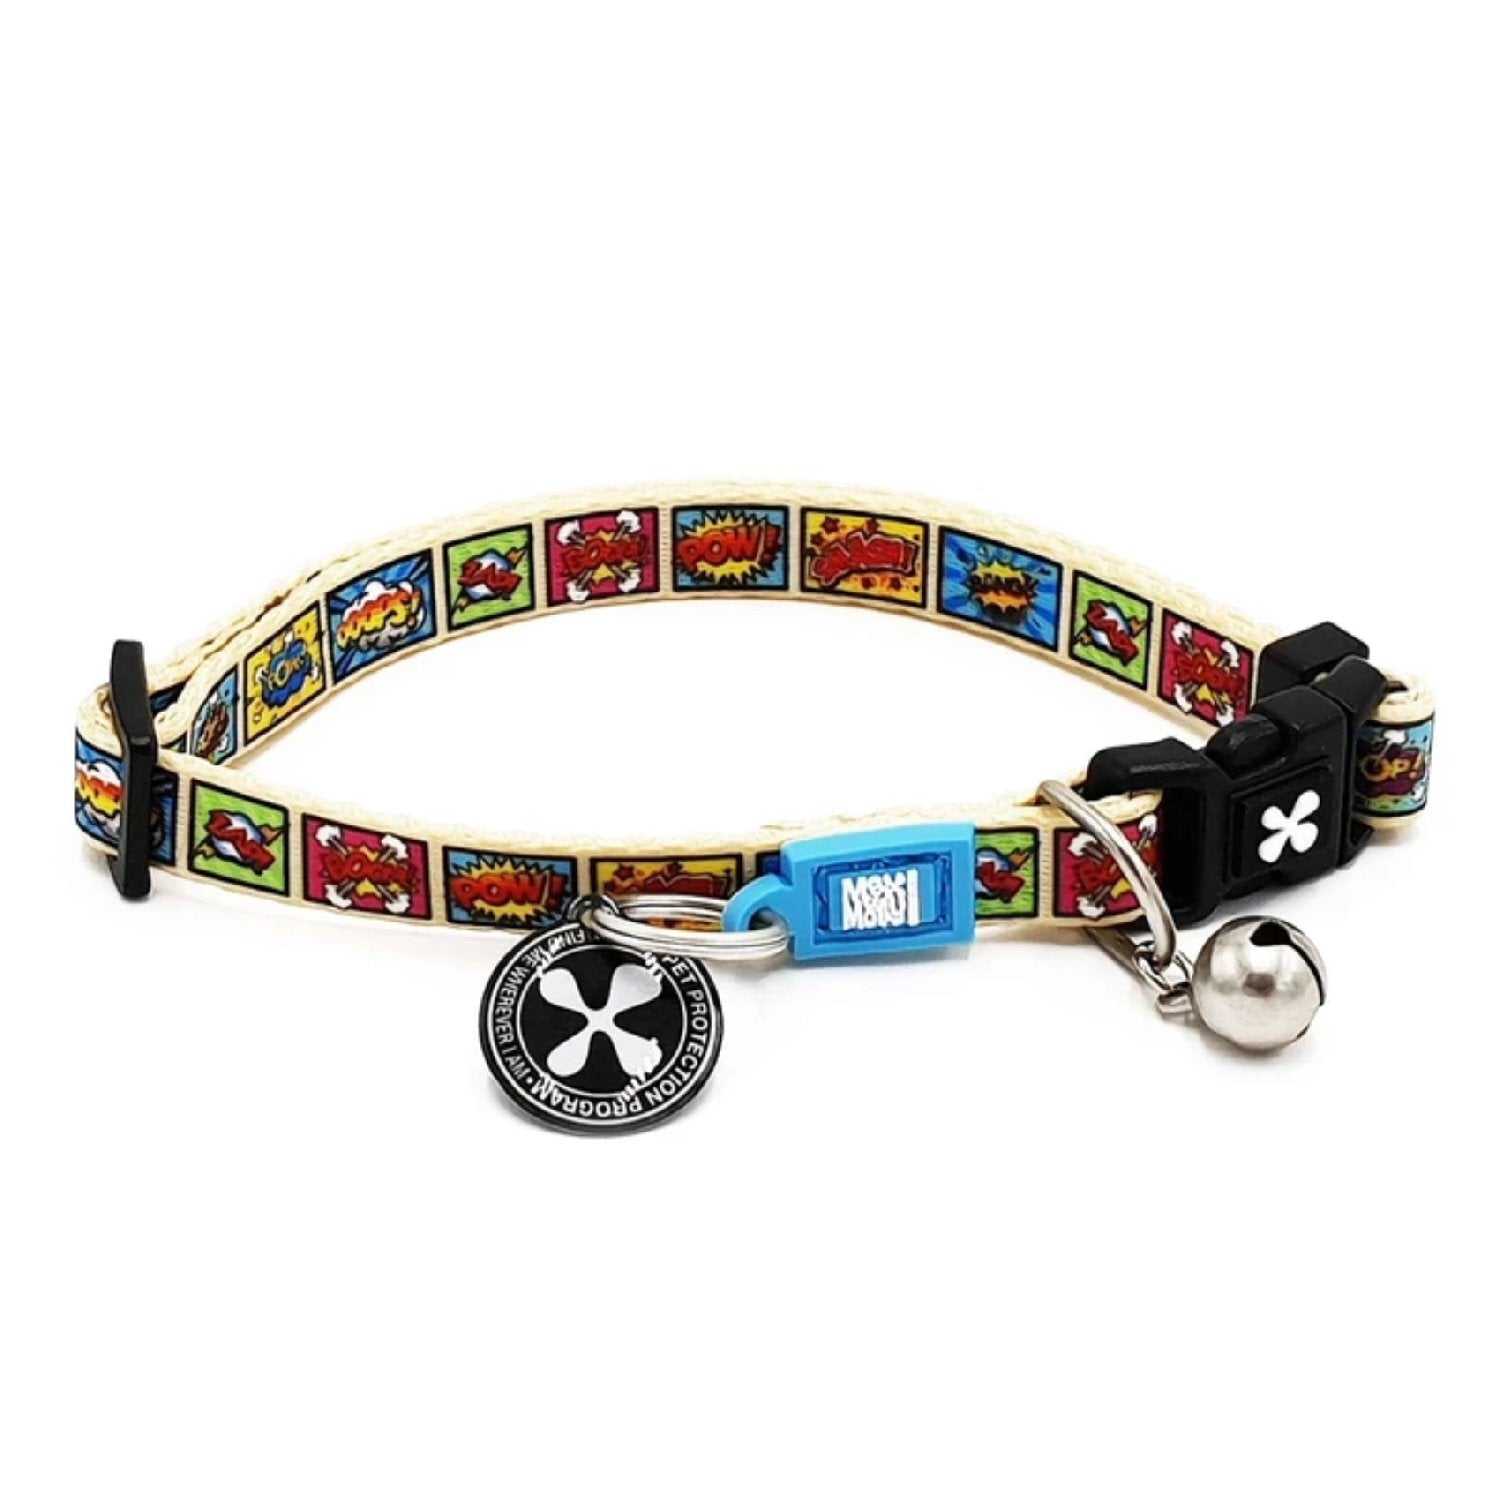 Max & Molly Smart ID Cat Collar - Comic - Pets and More